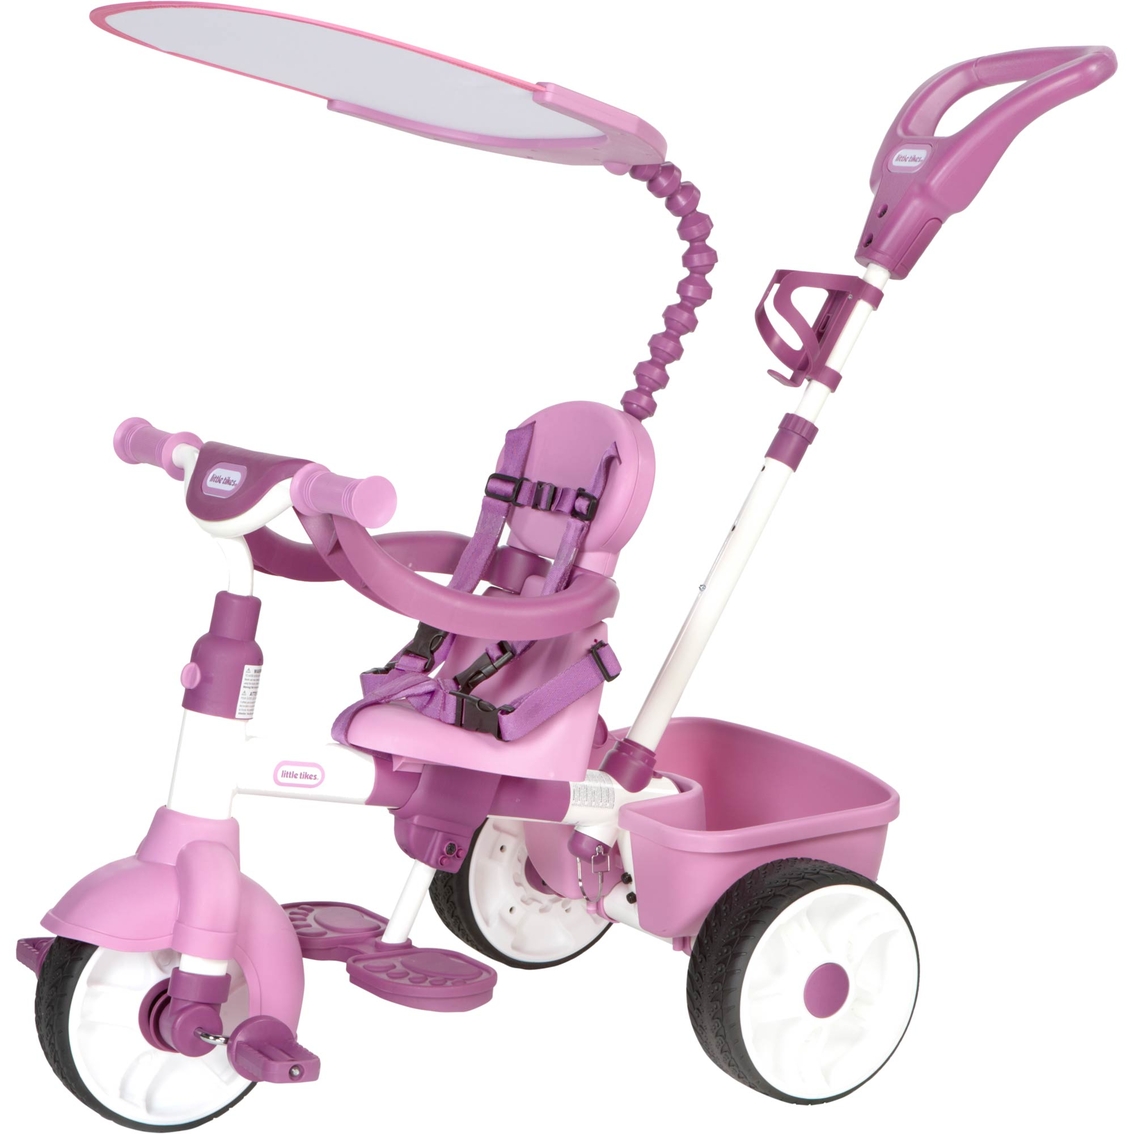 Little Tikes 4-in-1 Basic Edition Trike, Pink - Image 2 of 4